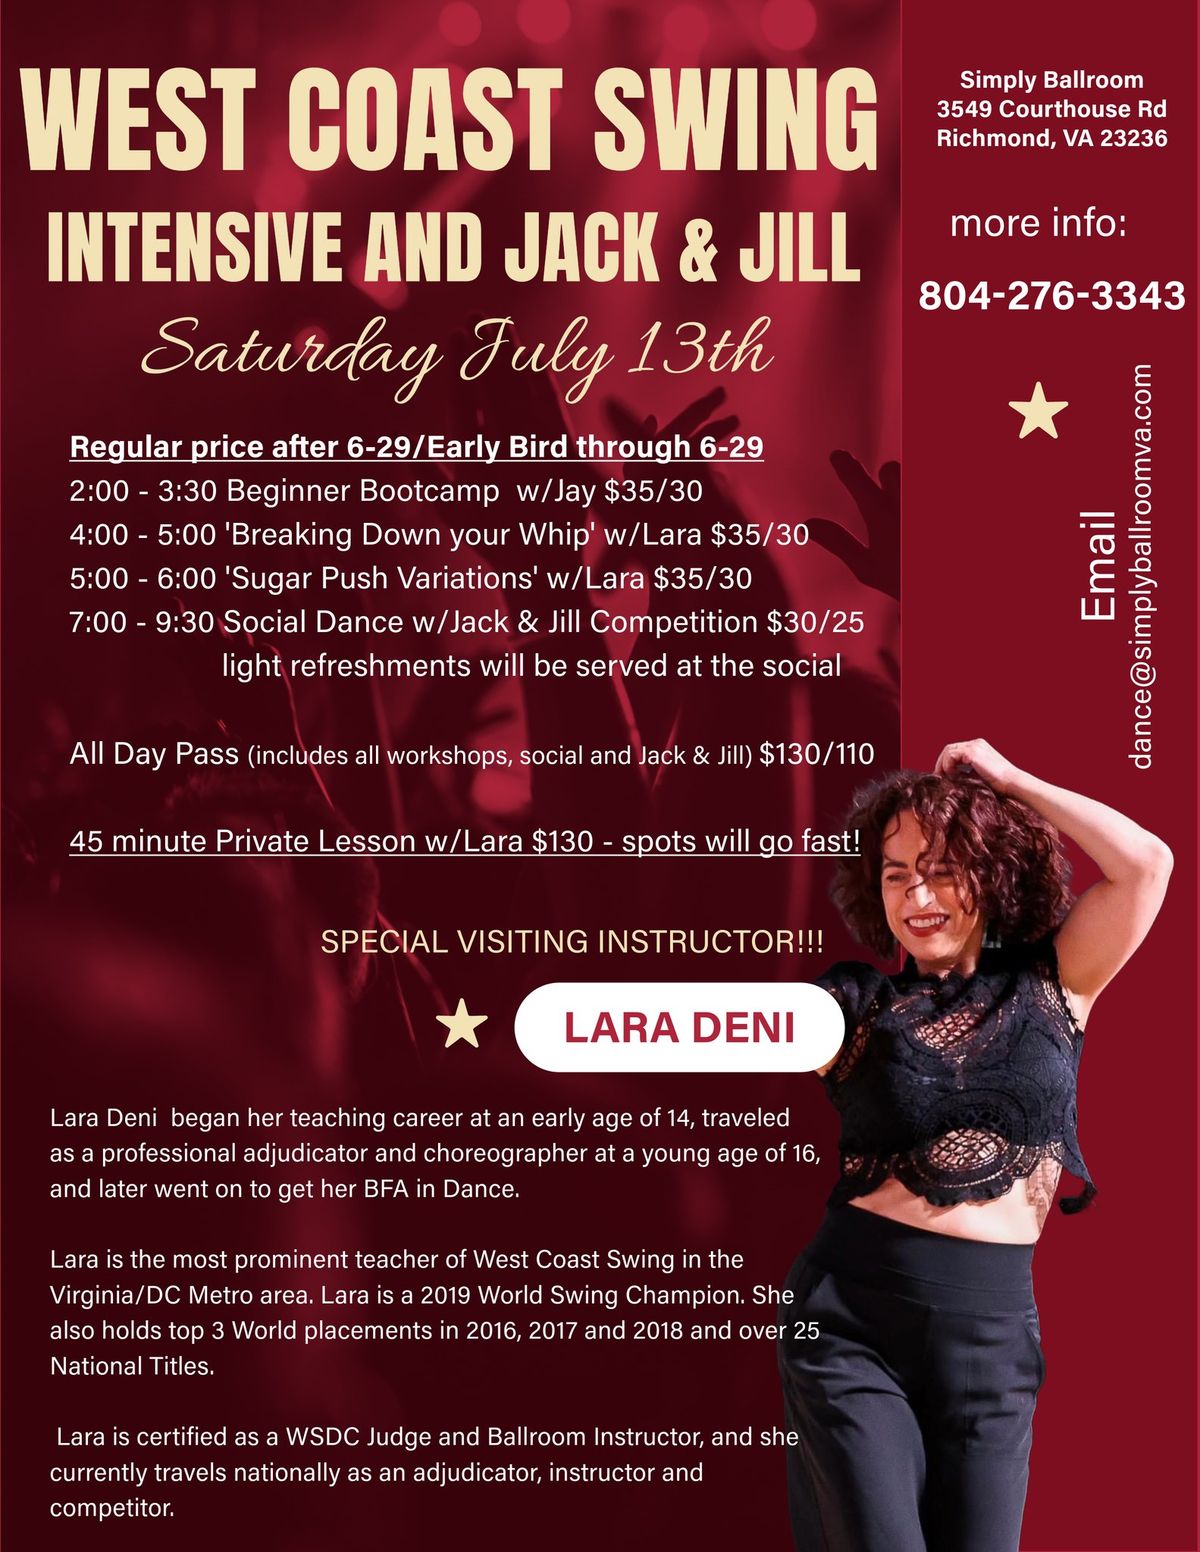 West Coast Swing Intensive Day